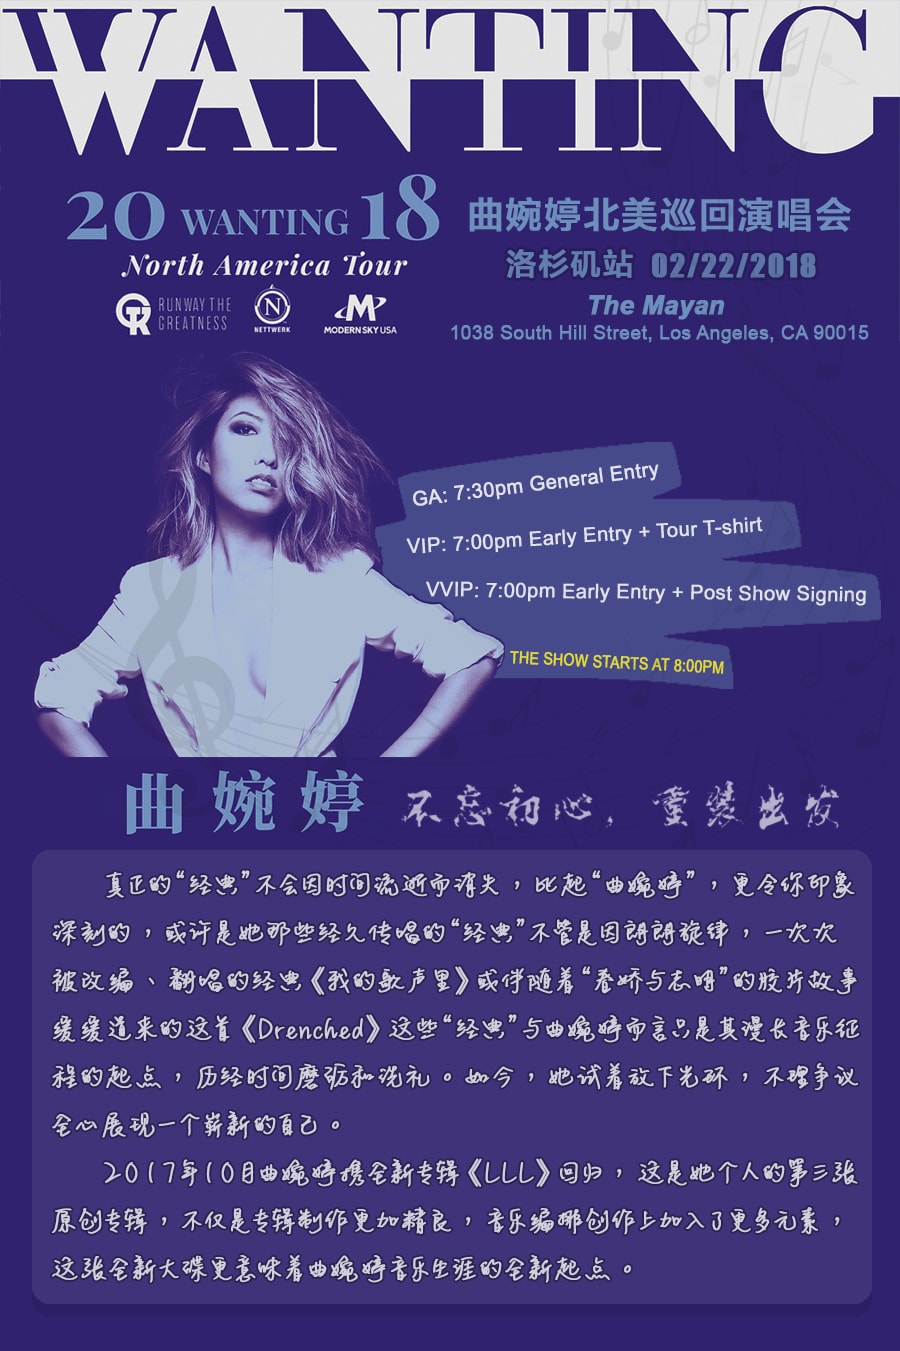 【2018/2/22  Los Angeles】Wanting Qu 2018 North America Tour (VIP Ticket $88 + $2 Processing Fee)